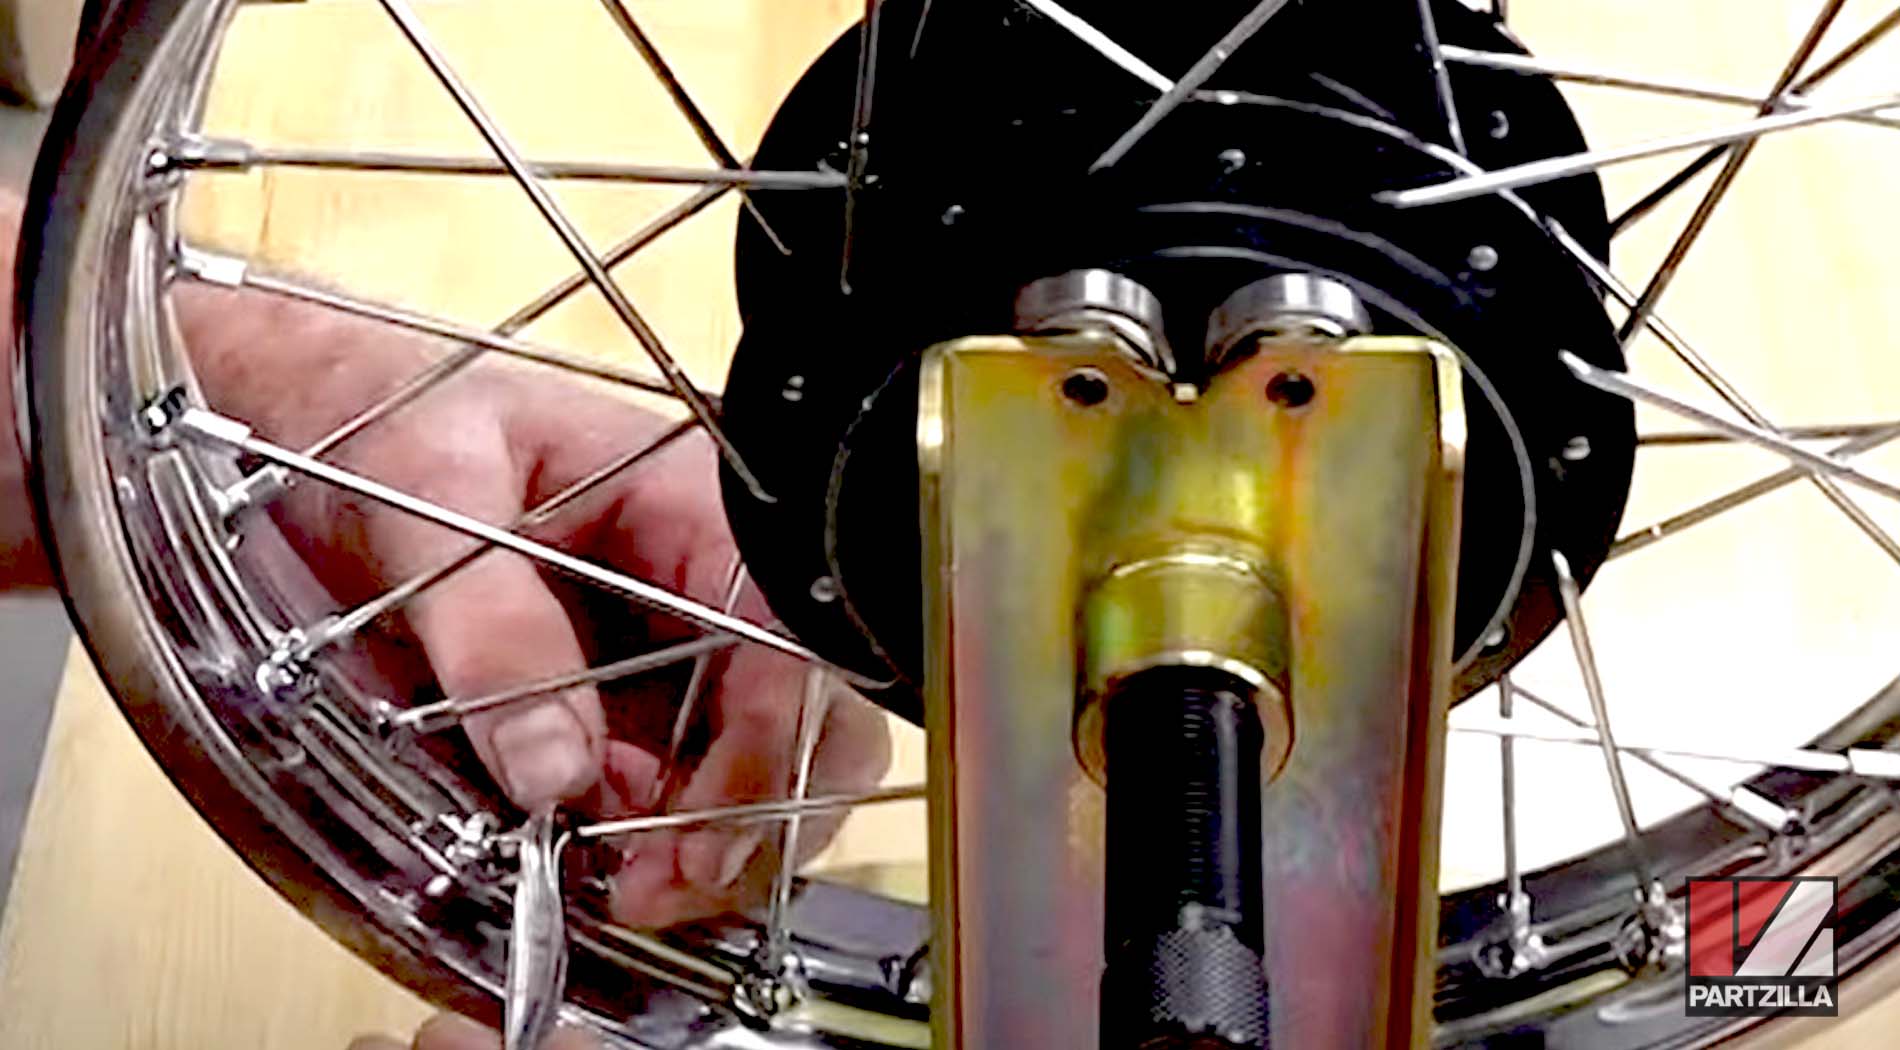 How to true a wheel tightening spokes